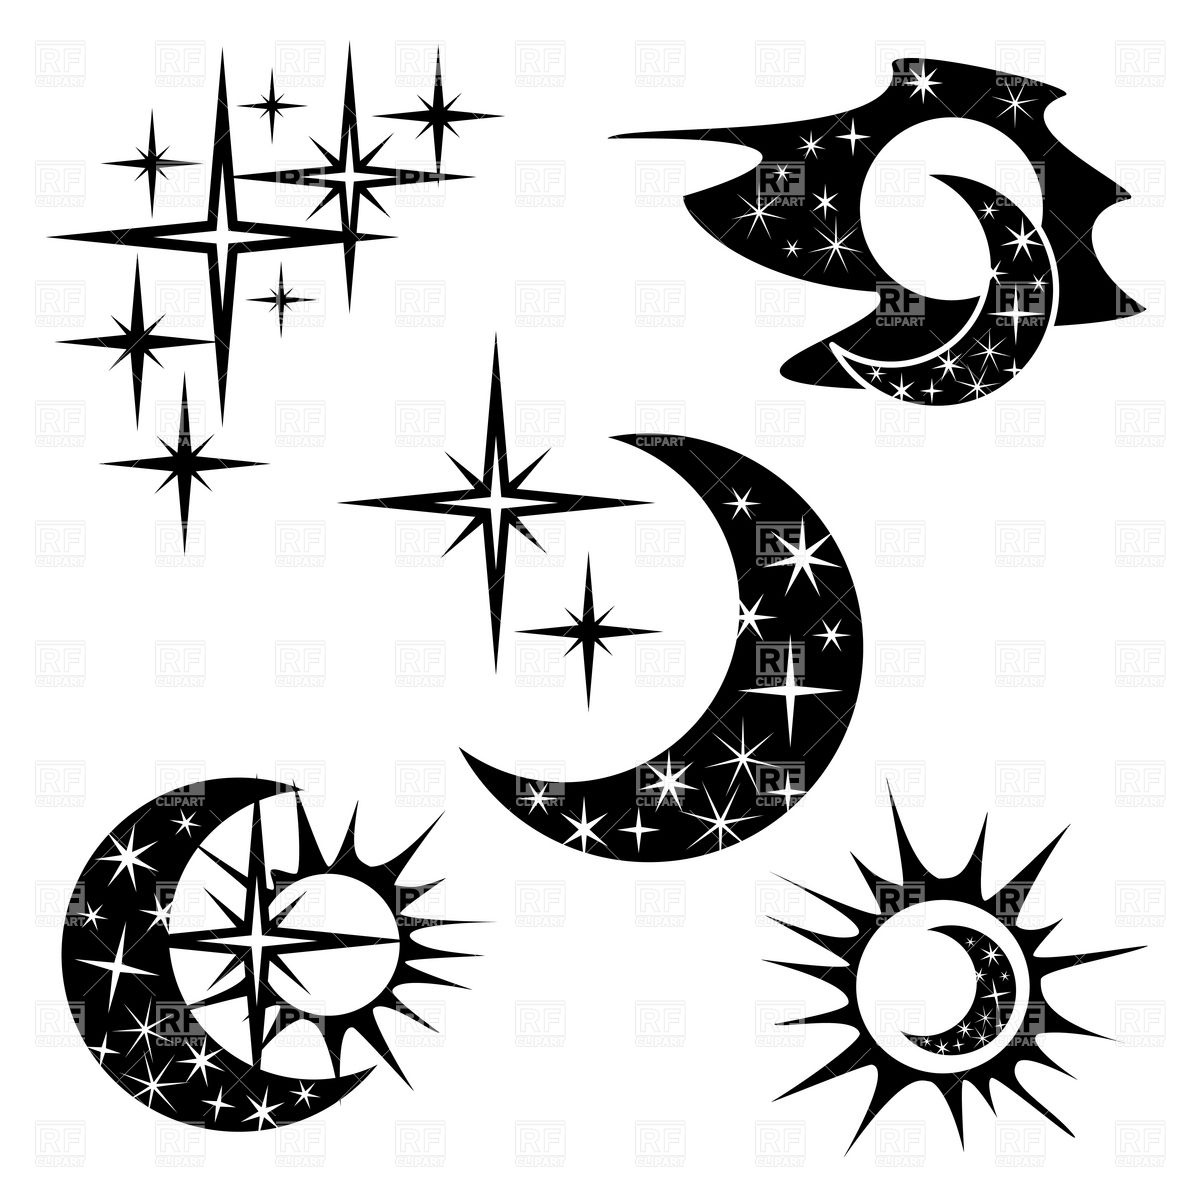 Night And Half Moon   Crescent With Star Pattern 20240 Silhouettes